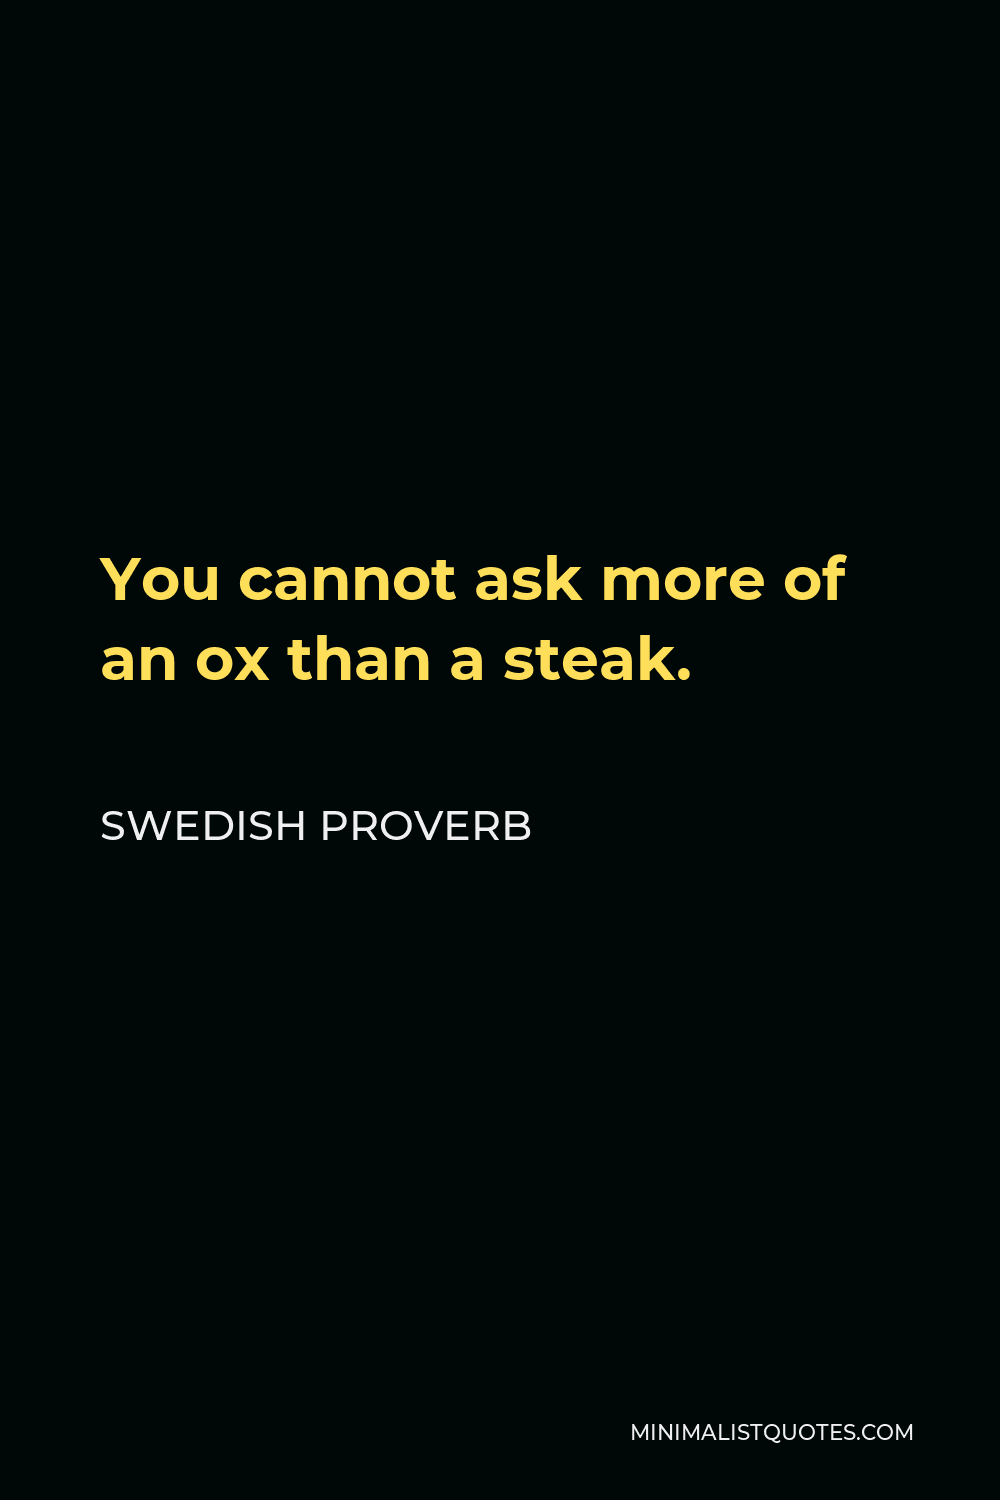 Swedish Proverb Quote - You cannot ask more of an ox than a steak.